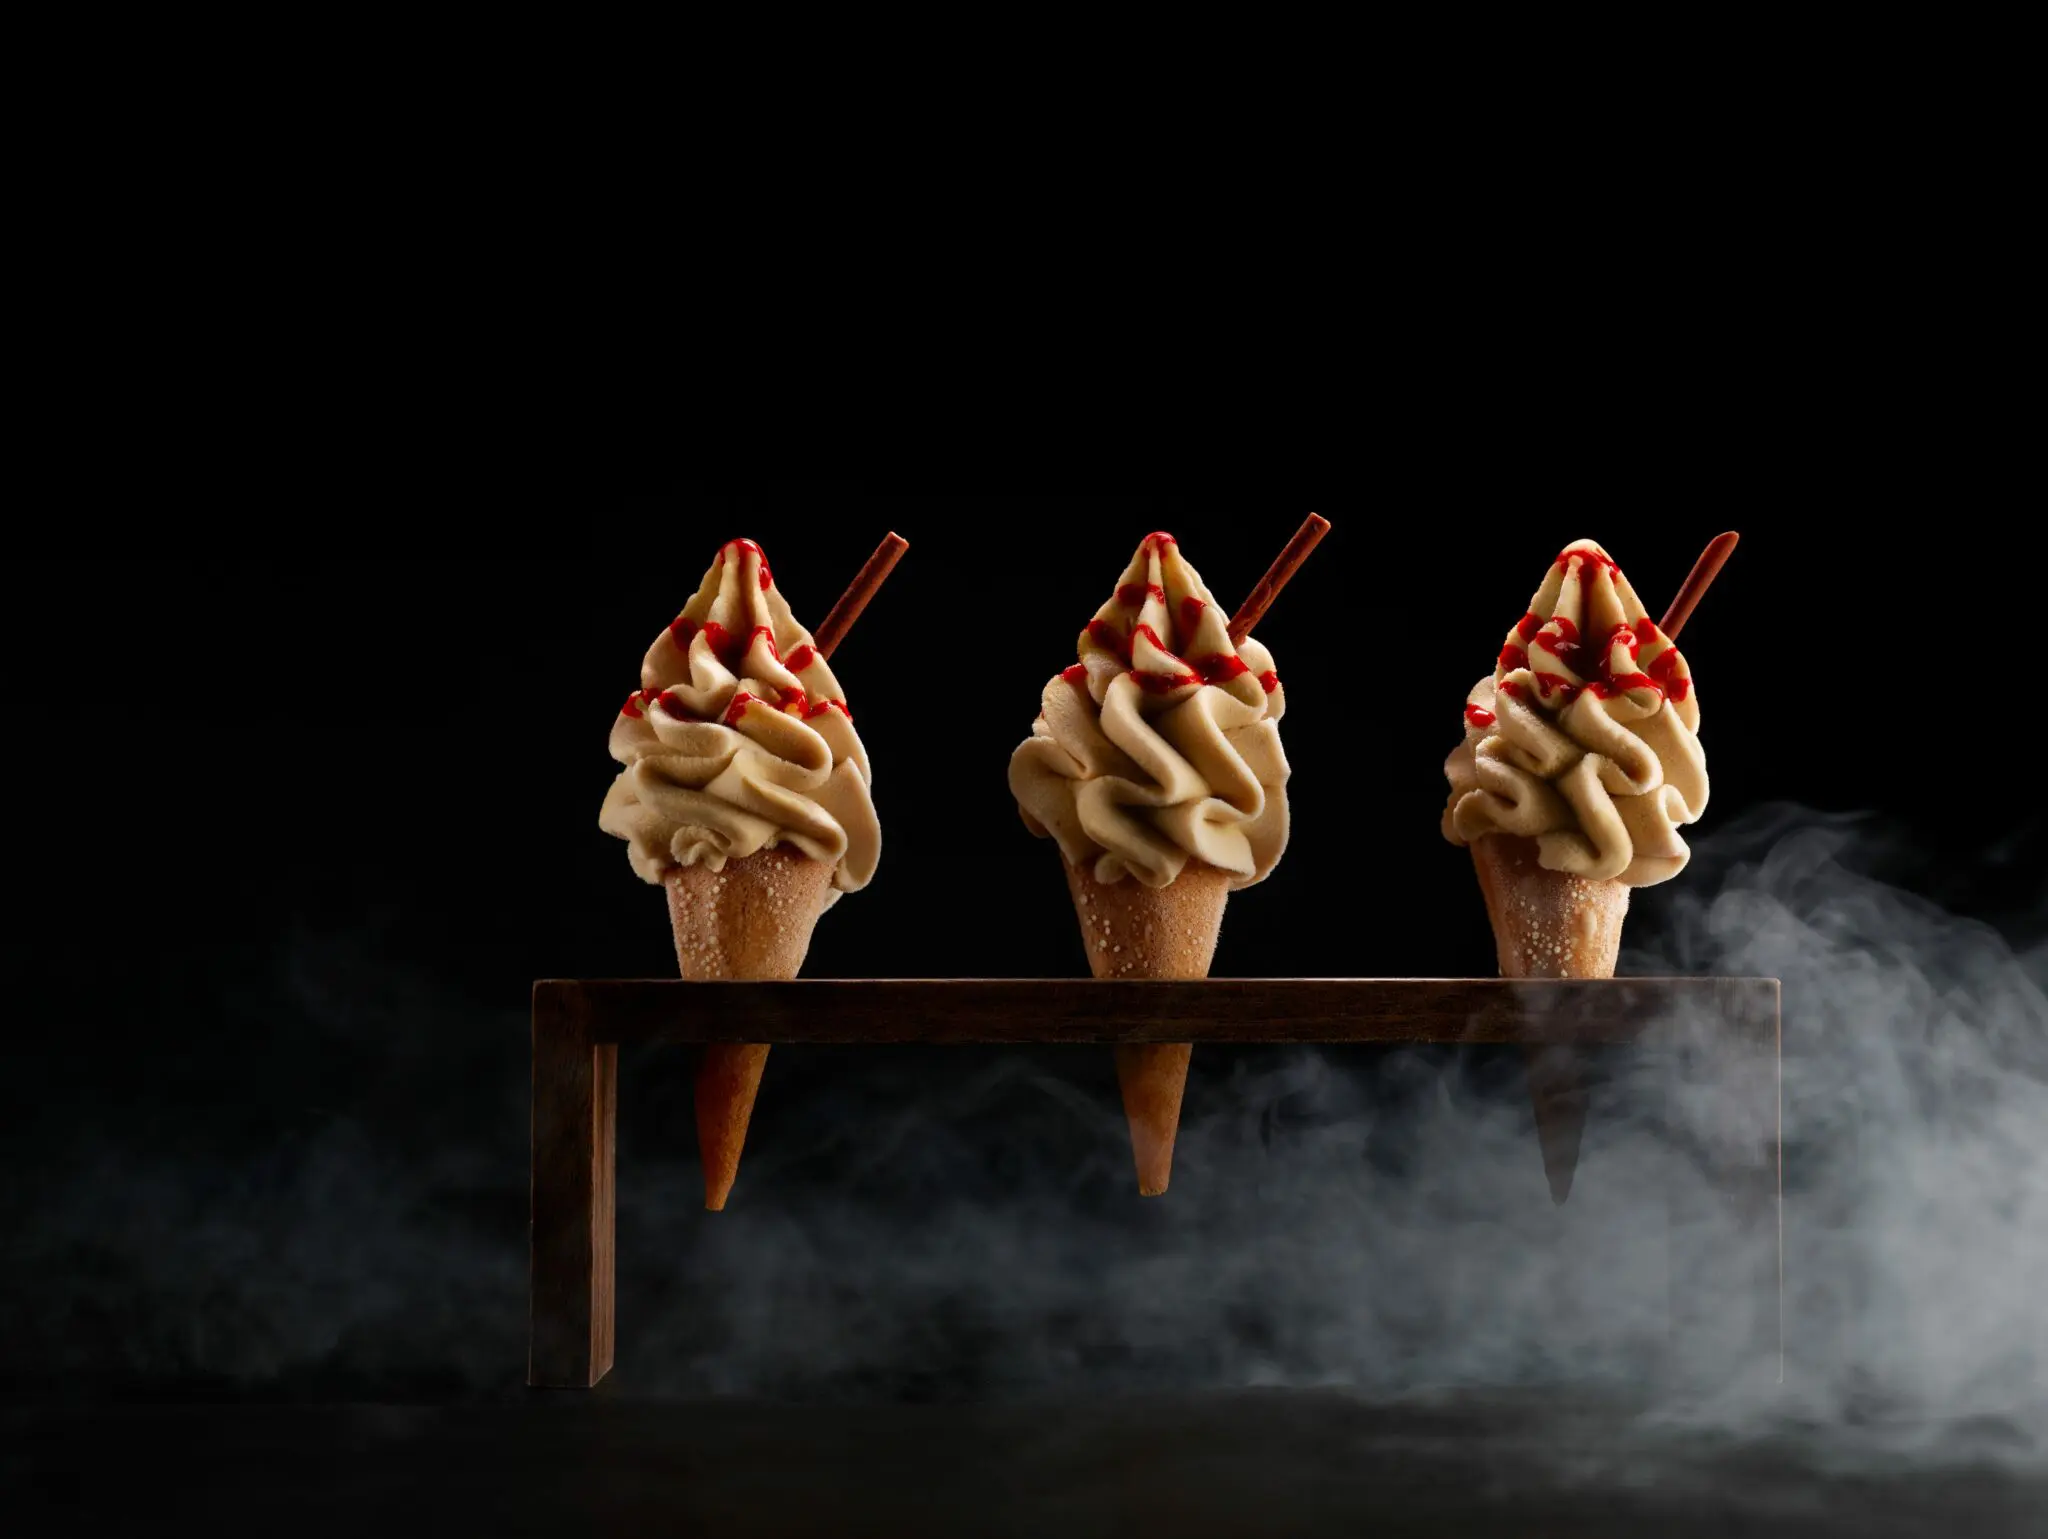 Image of 3 dessert ice creams with strawberry sauce and a flake